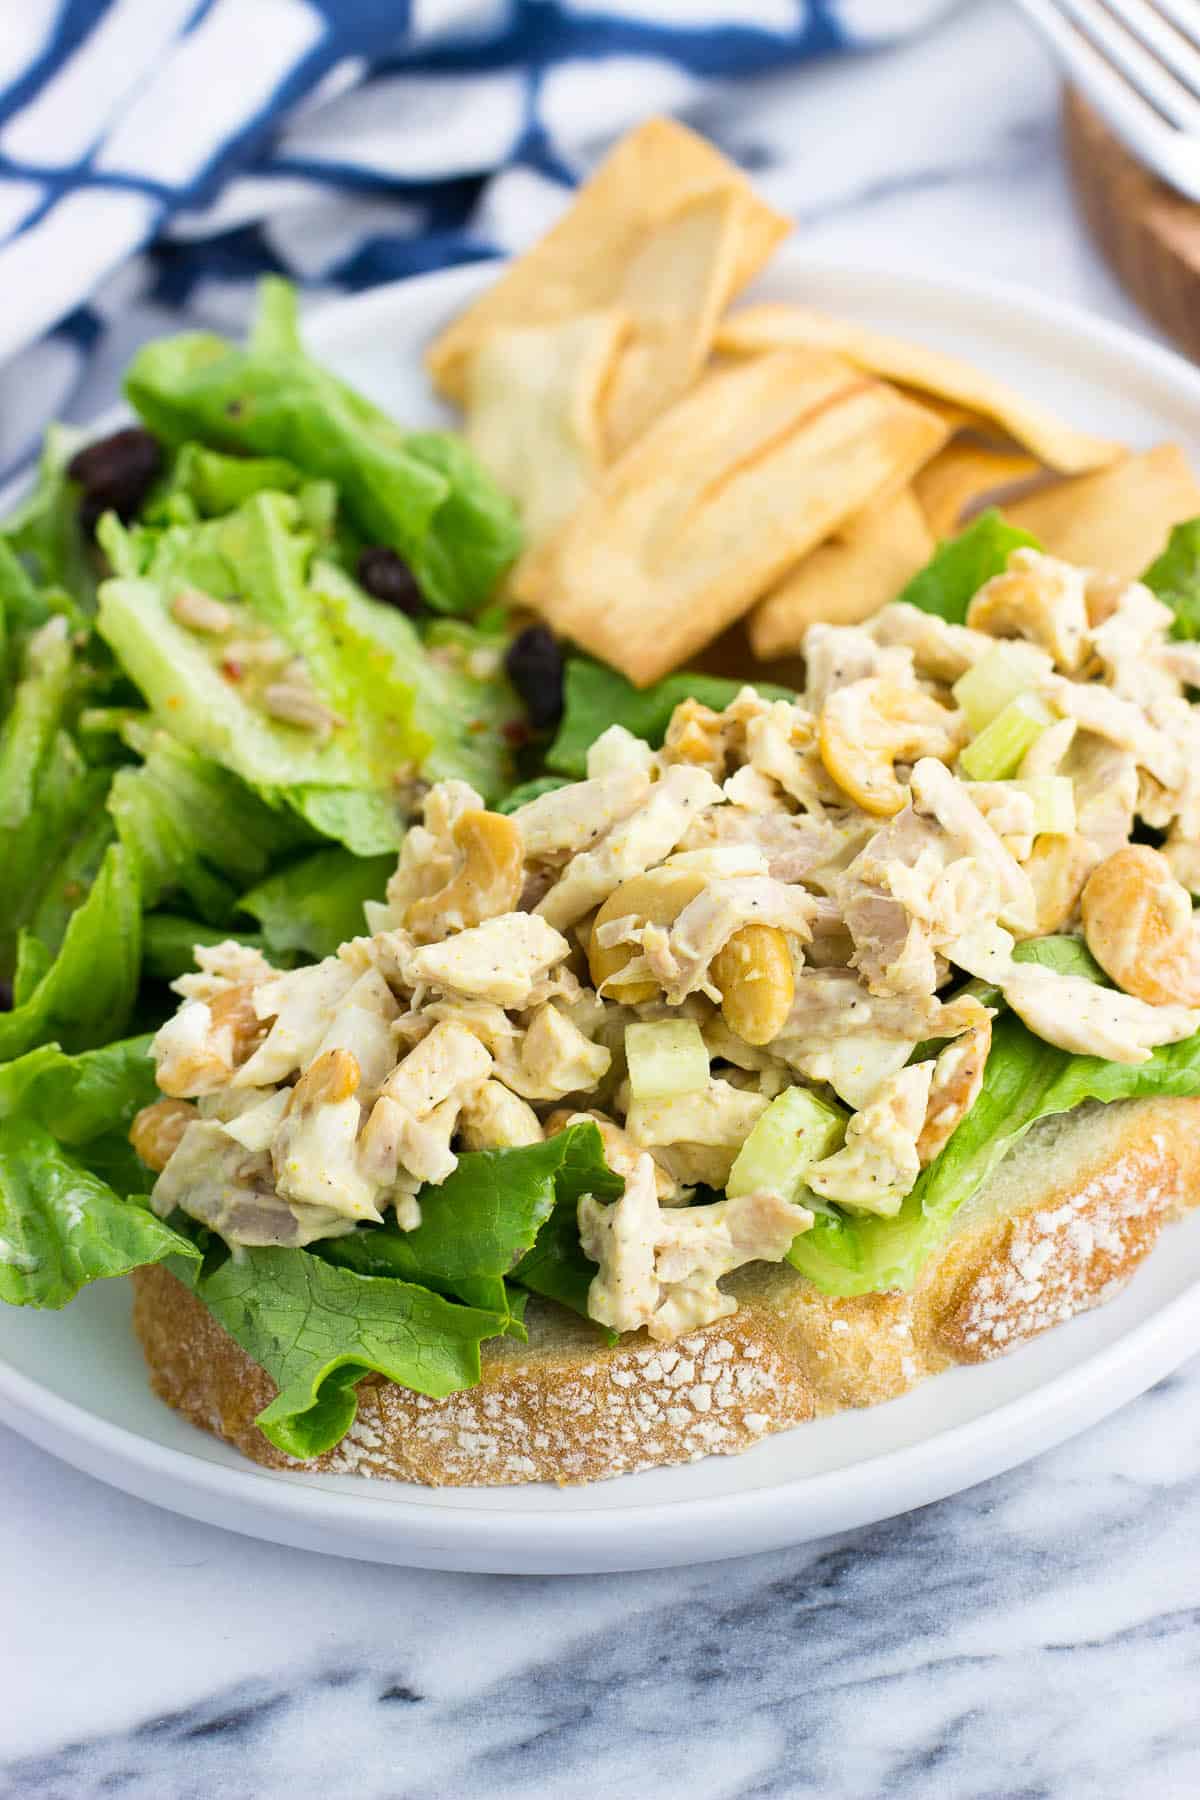 An open-face chicken salad sandwich on a plate with a side salad and pita chips.